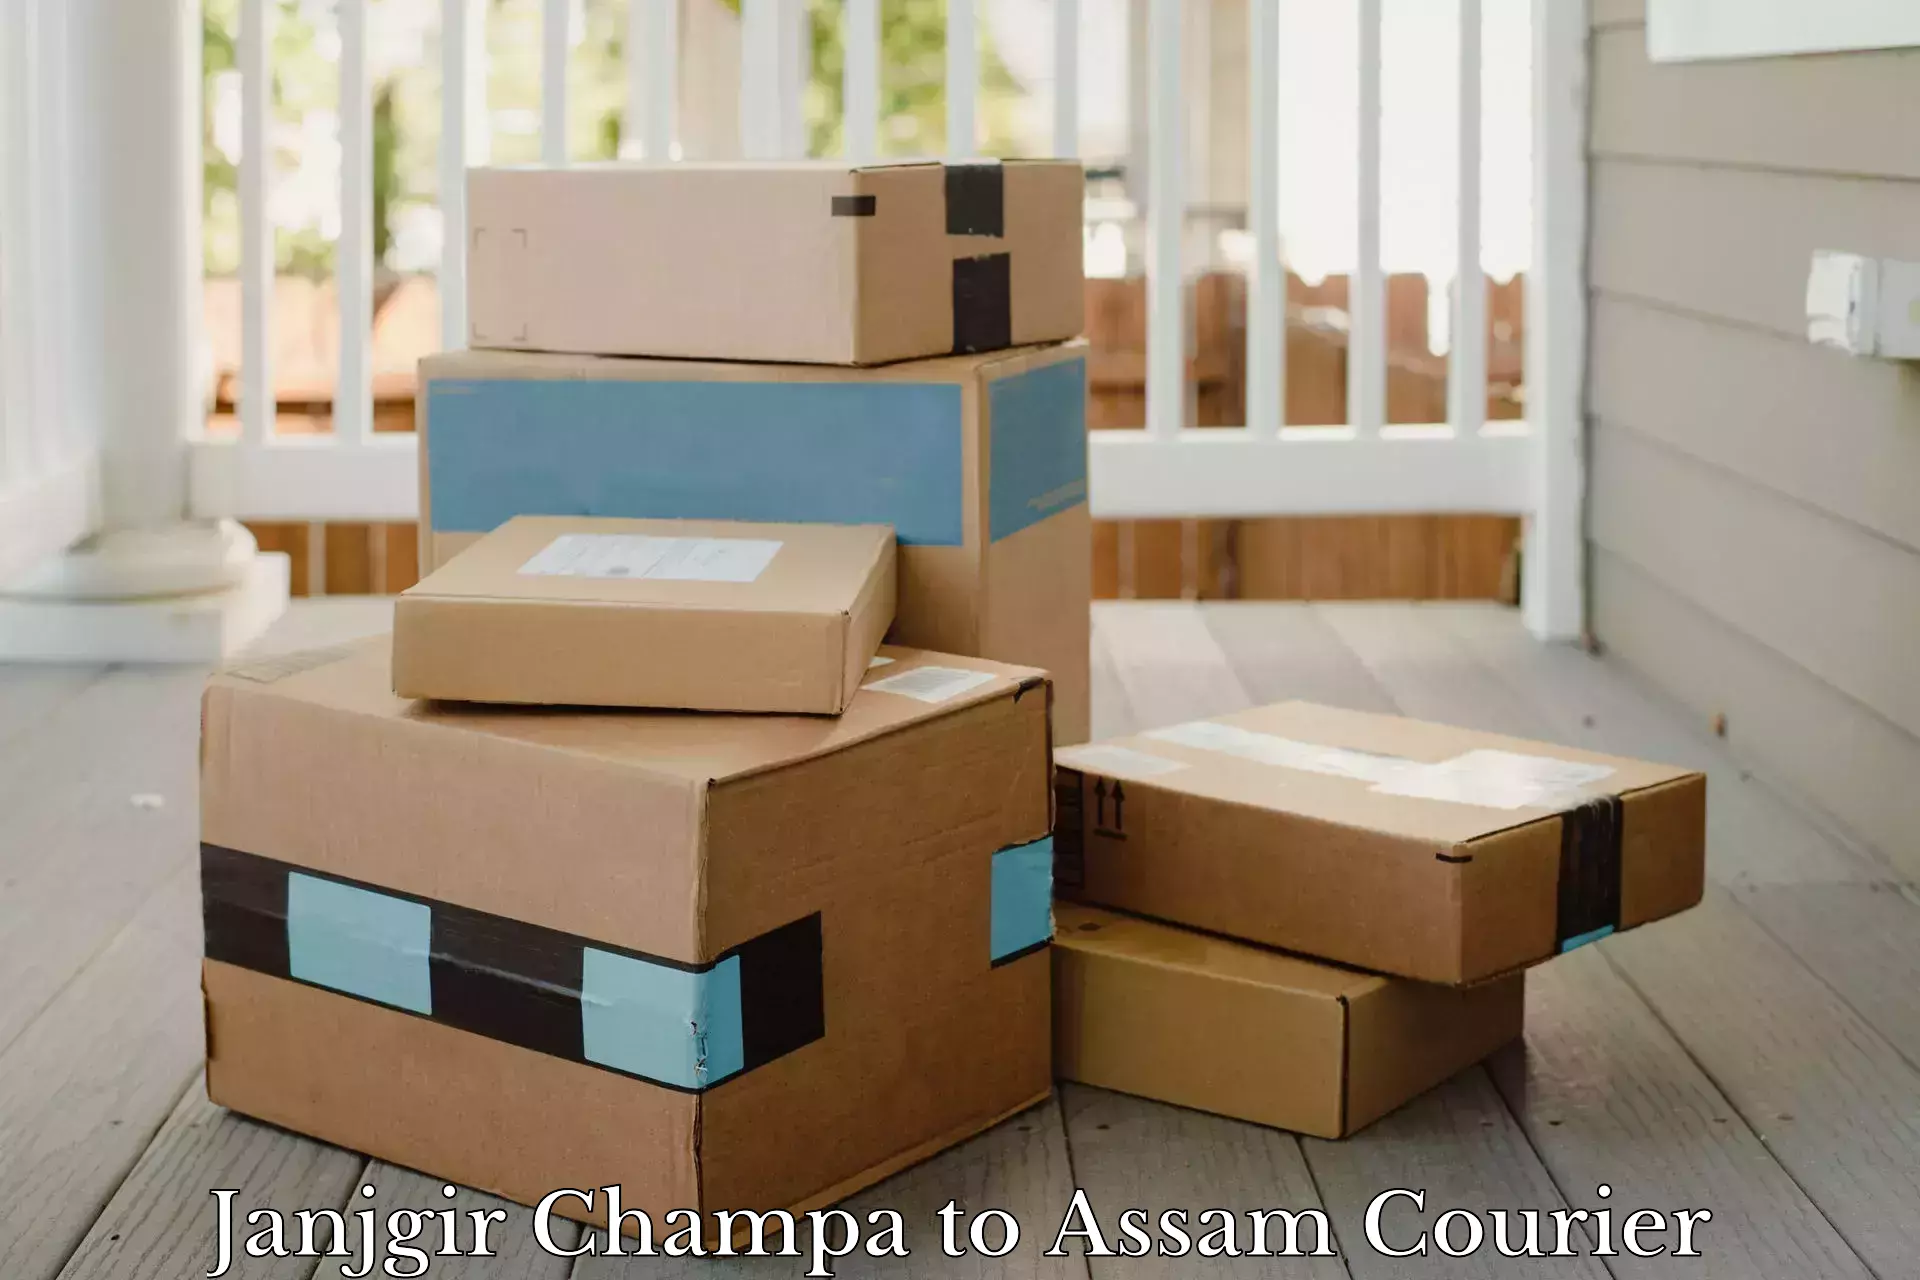 Reliable courier service Janjgir Champa to Lala Assam